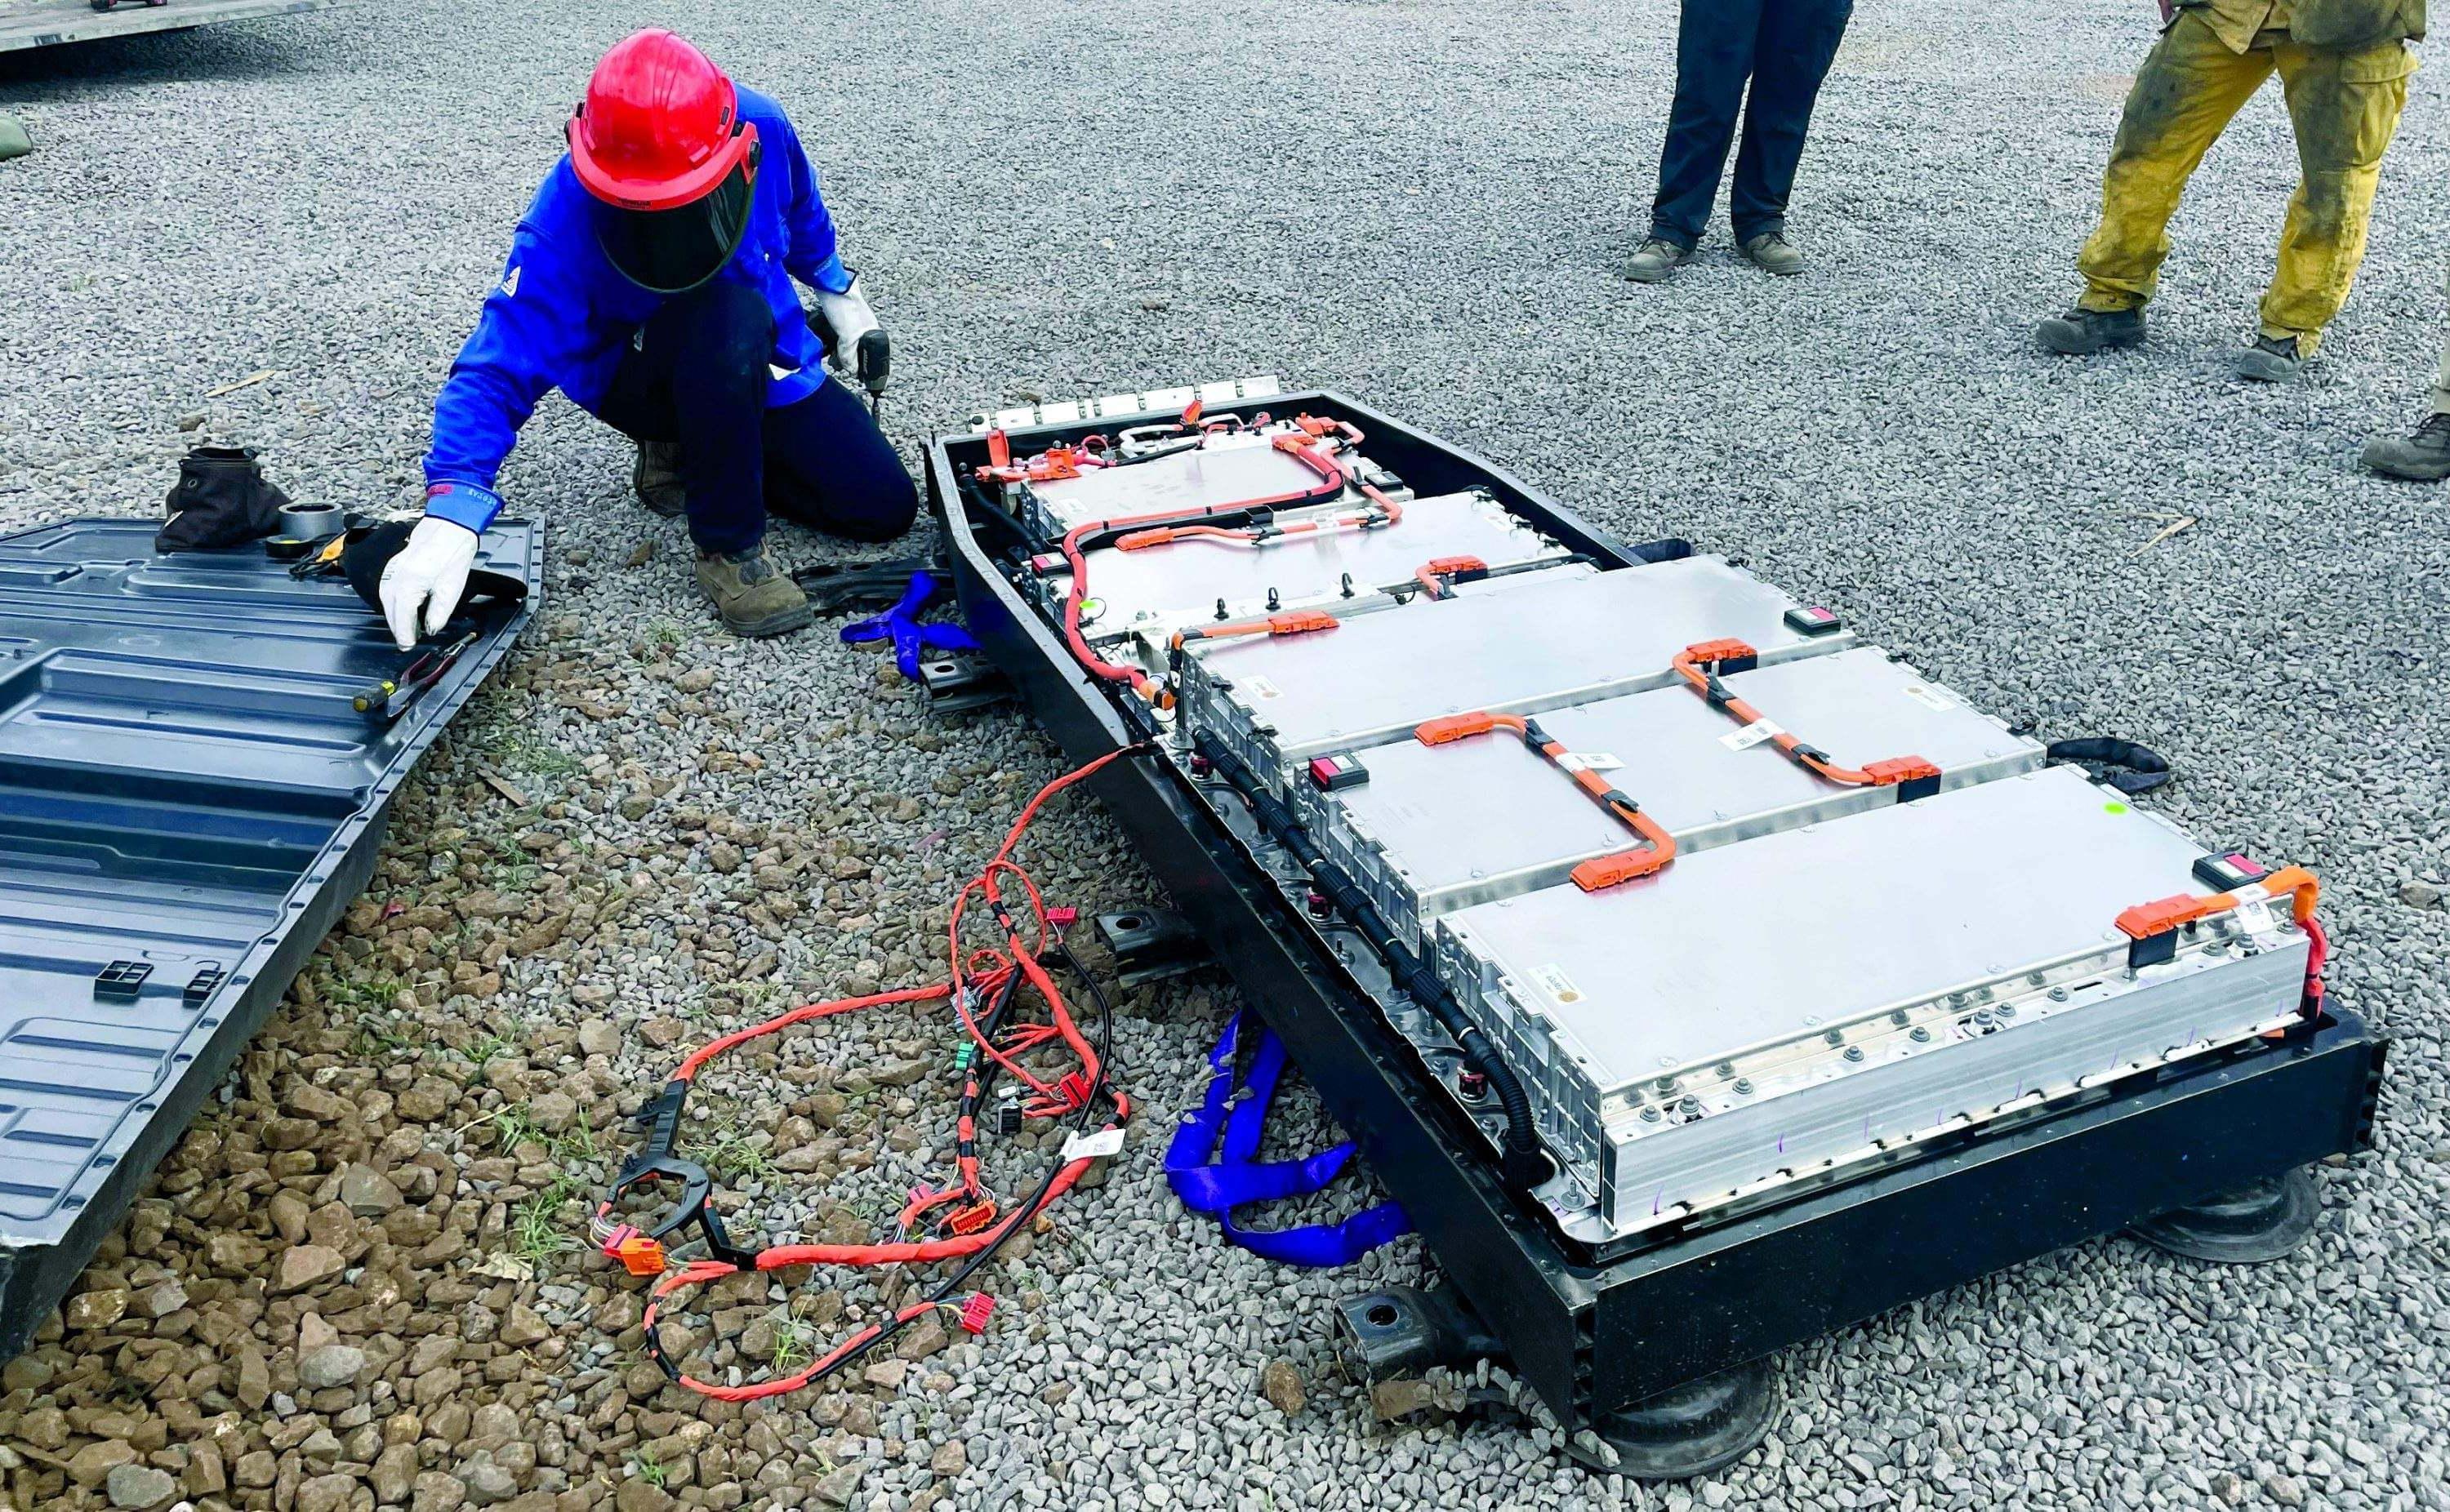 An electrician wearing a red hard hat and protective mask and blue jacket kneels on the ground to disassemble a Ford Lightning battery.